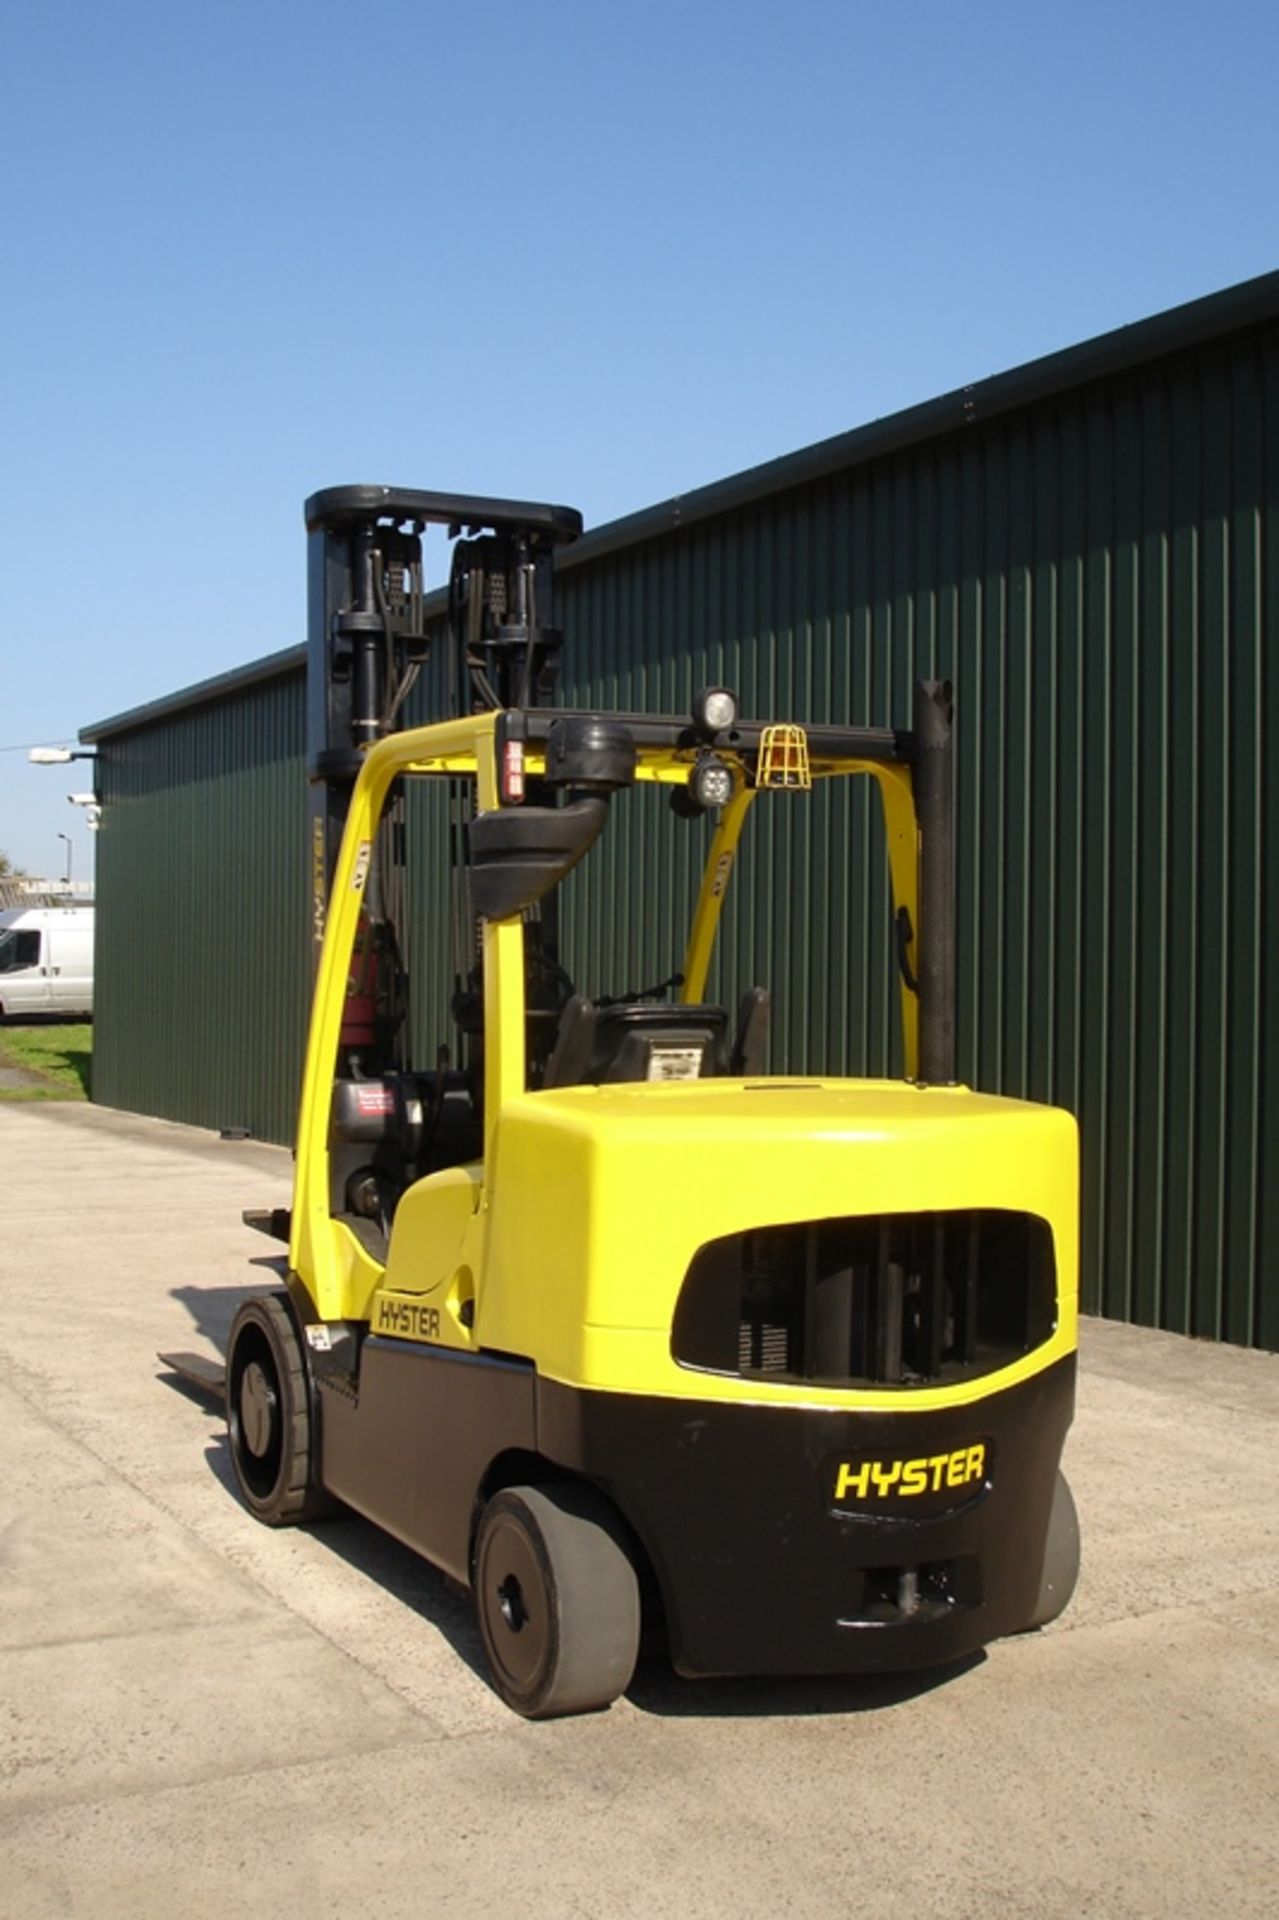 HYSTER COMPACT 7 TON FORKLIFT (2009) - Image 2 of 6